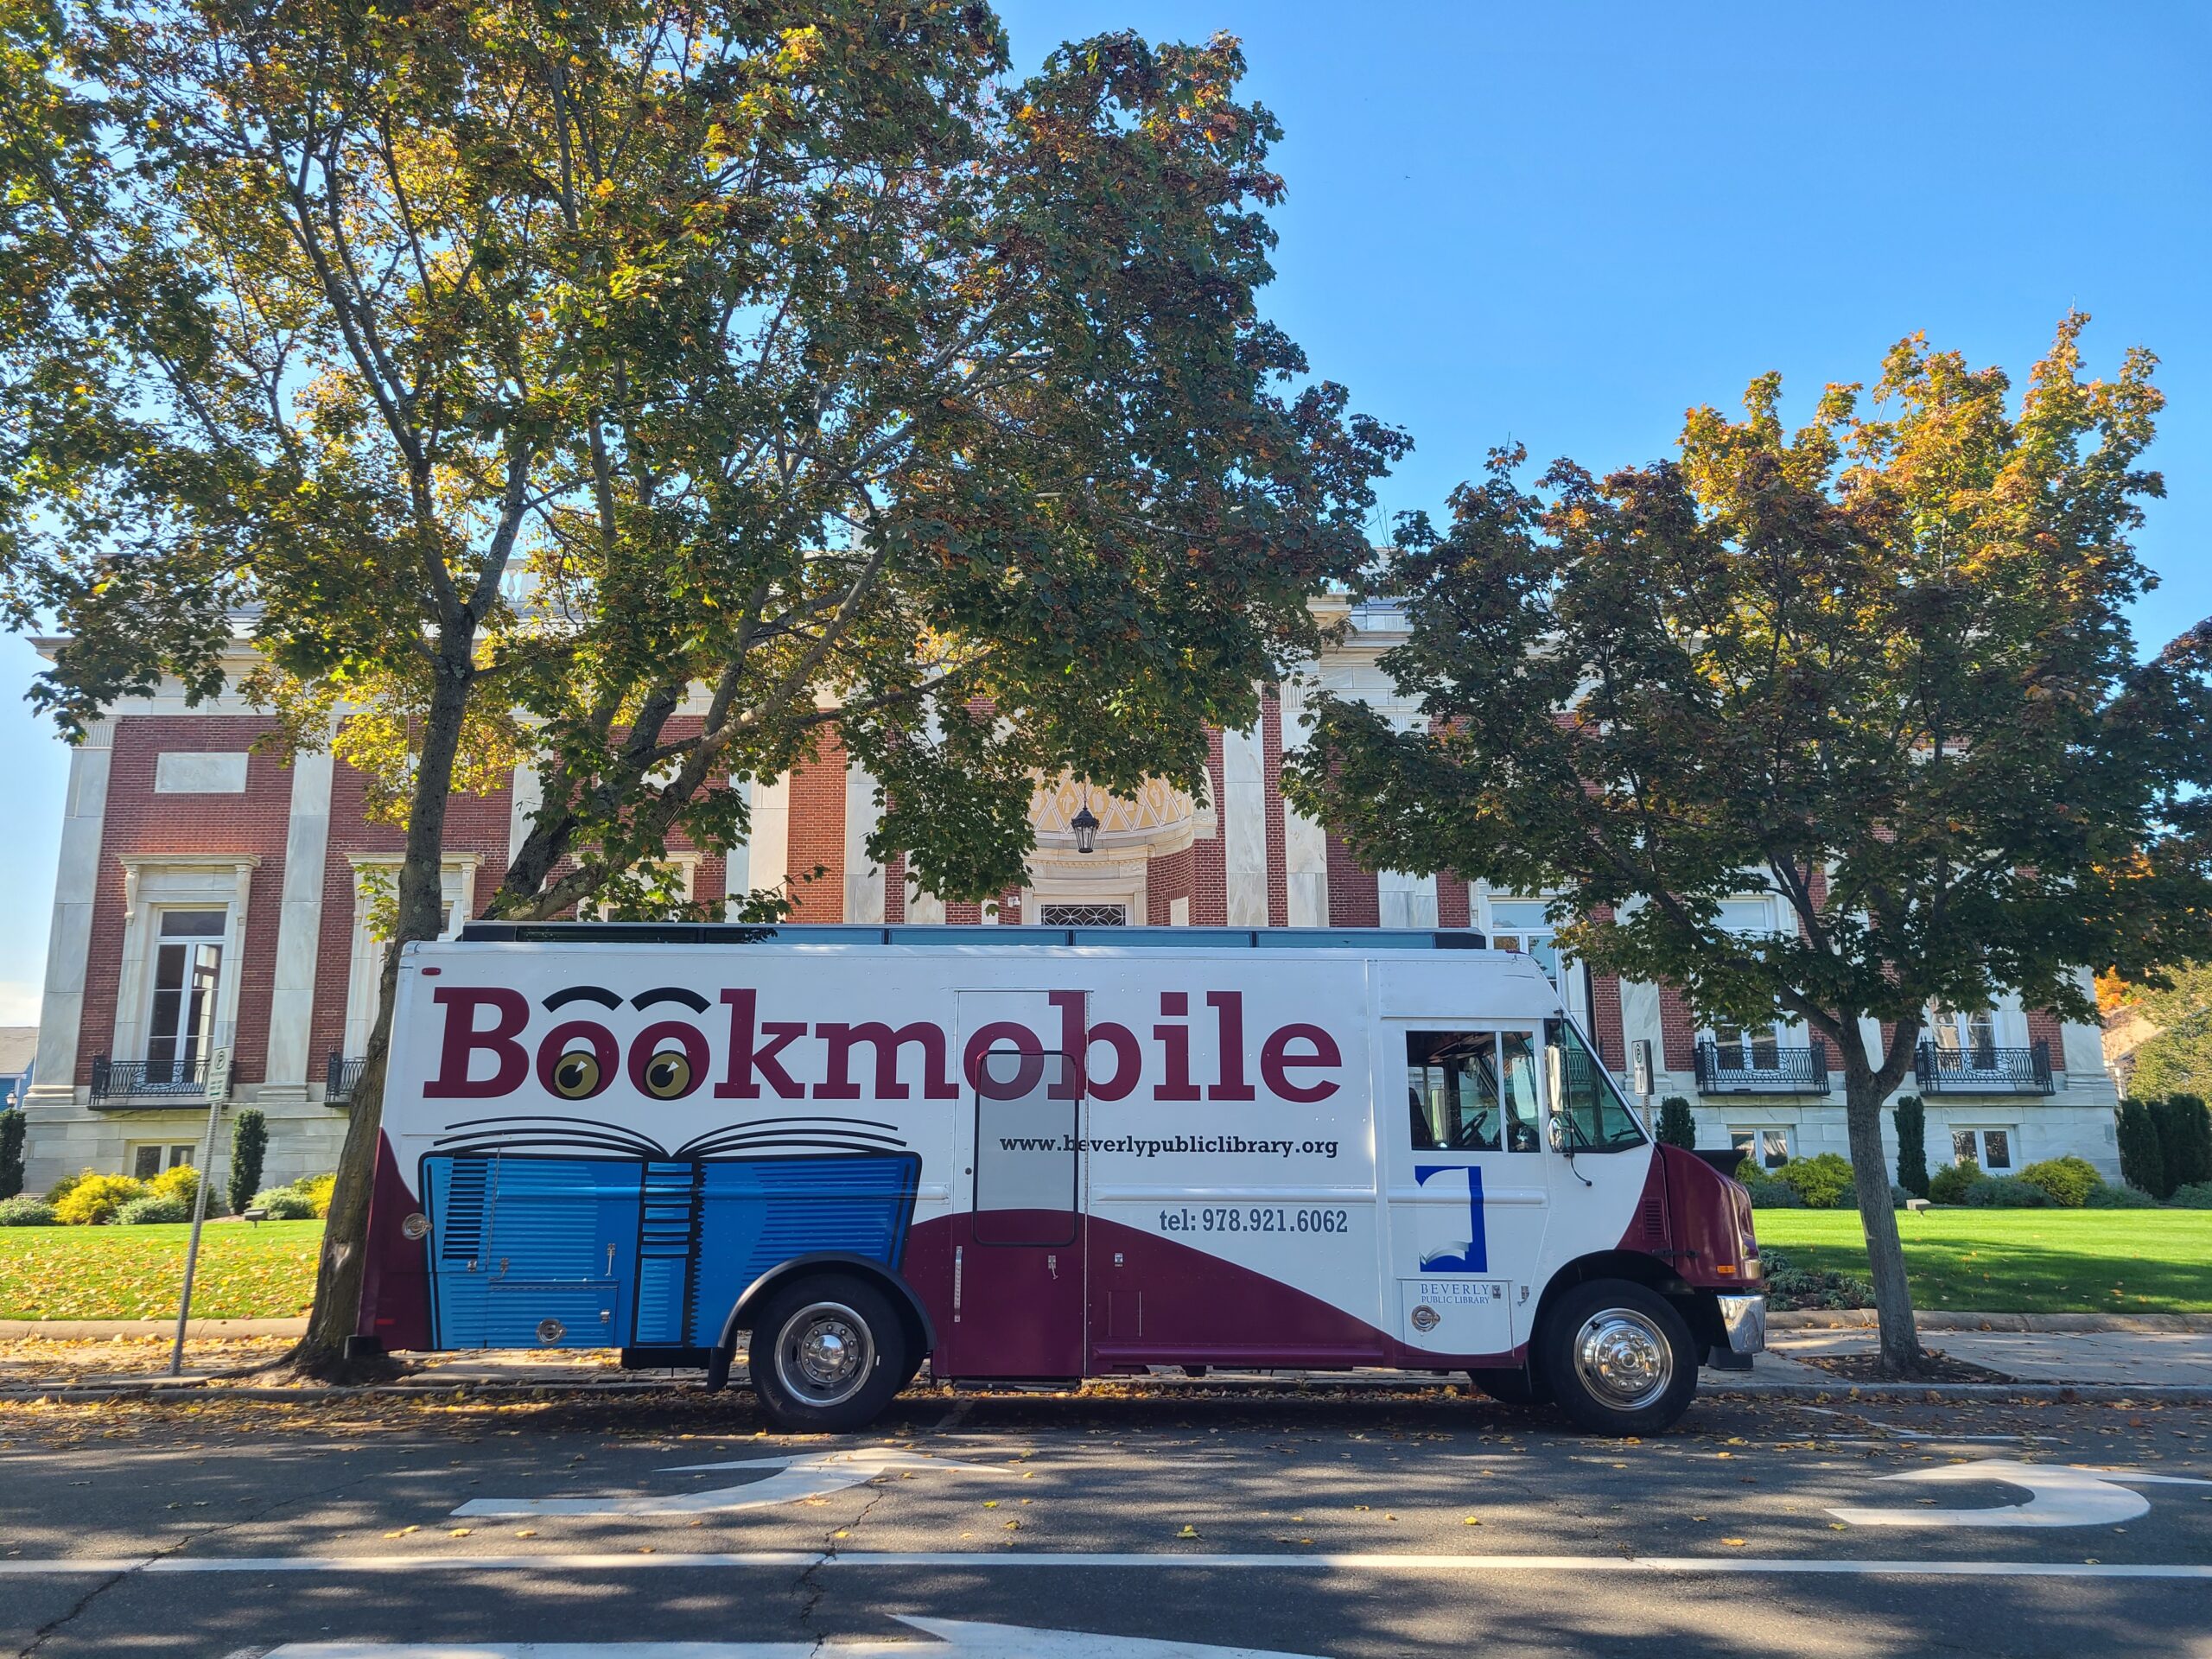 Beverly Bookmobile parked by trees.